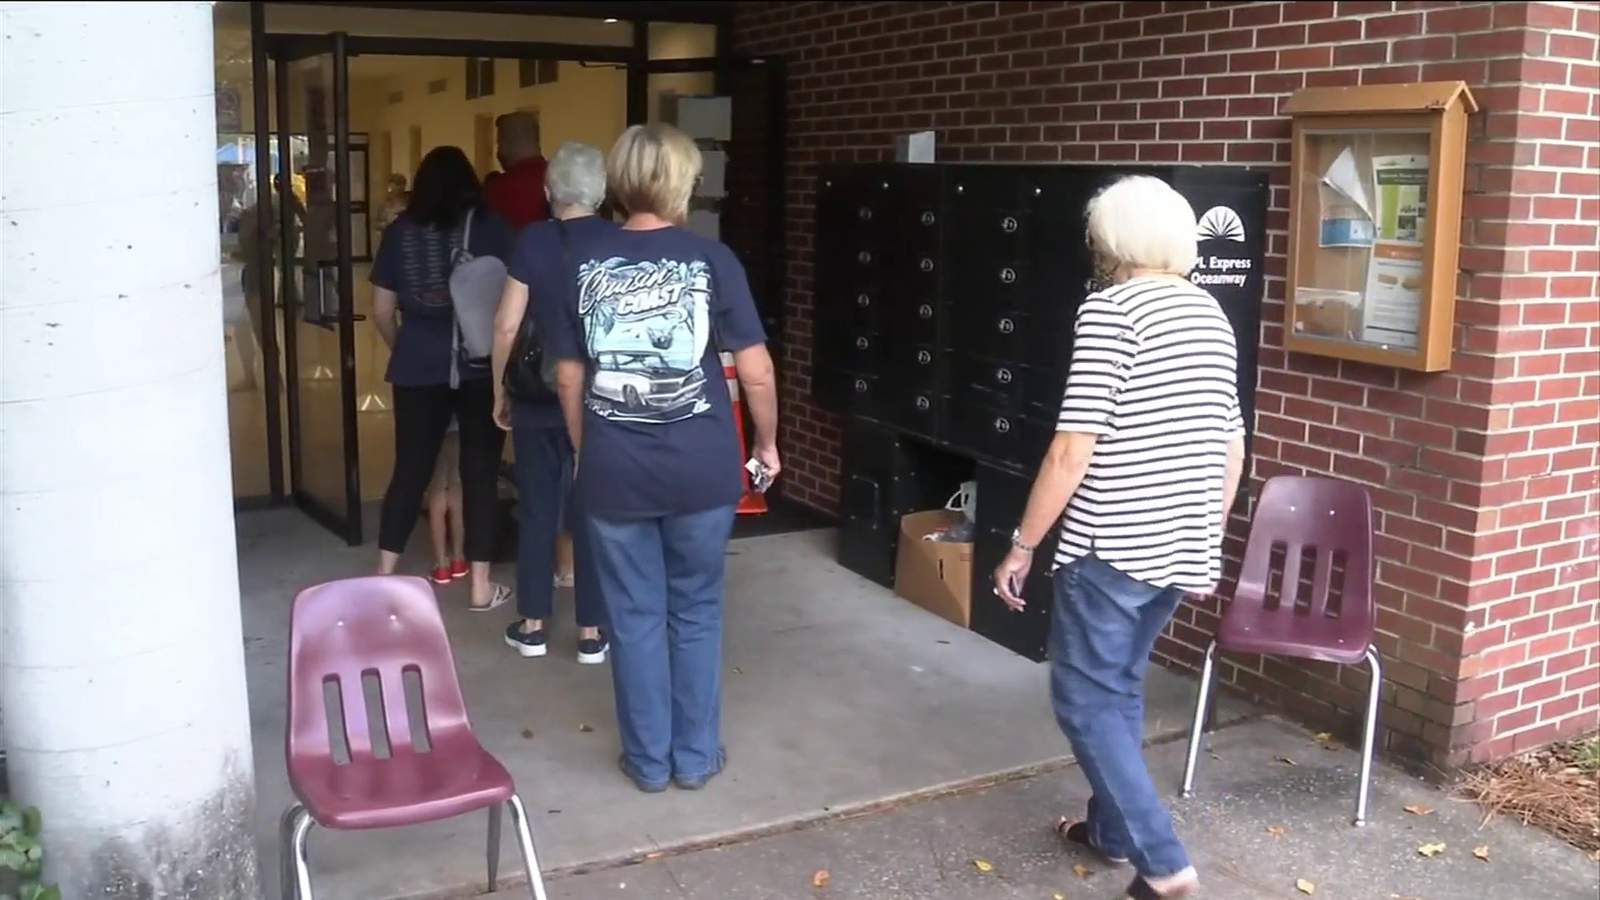 80 to 90% voter turnout expected in Northeast Florida